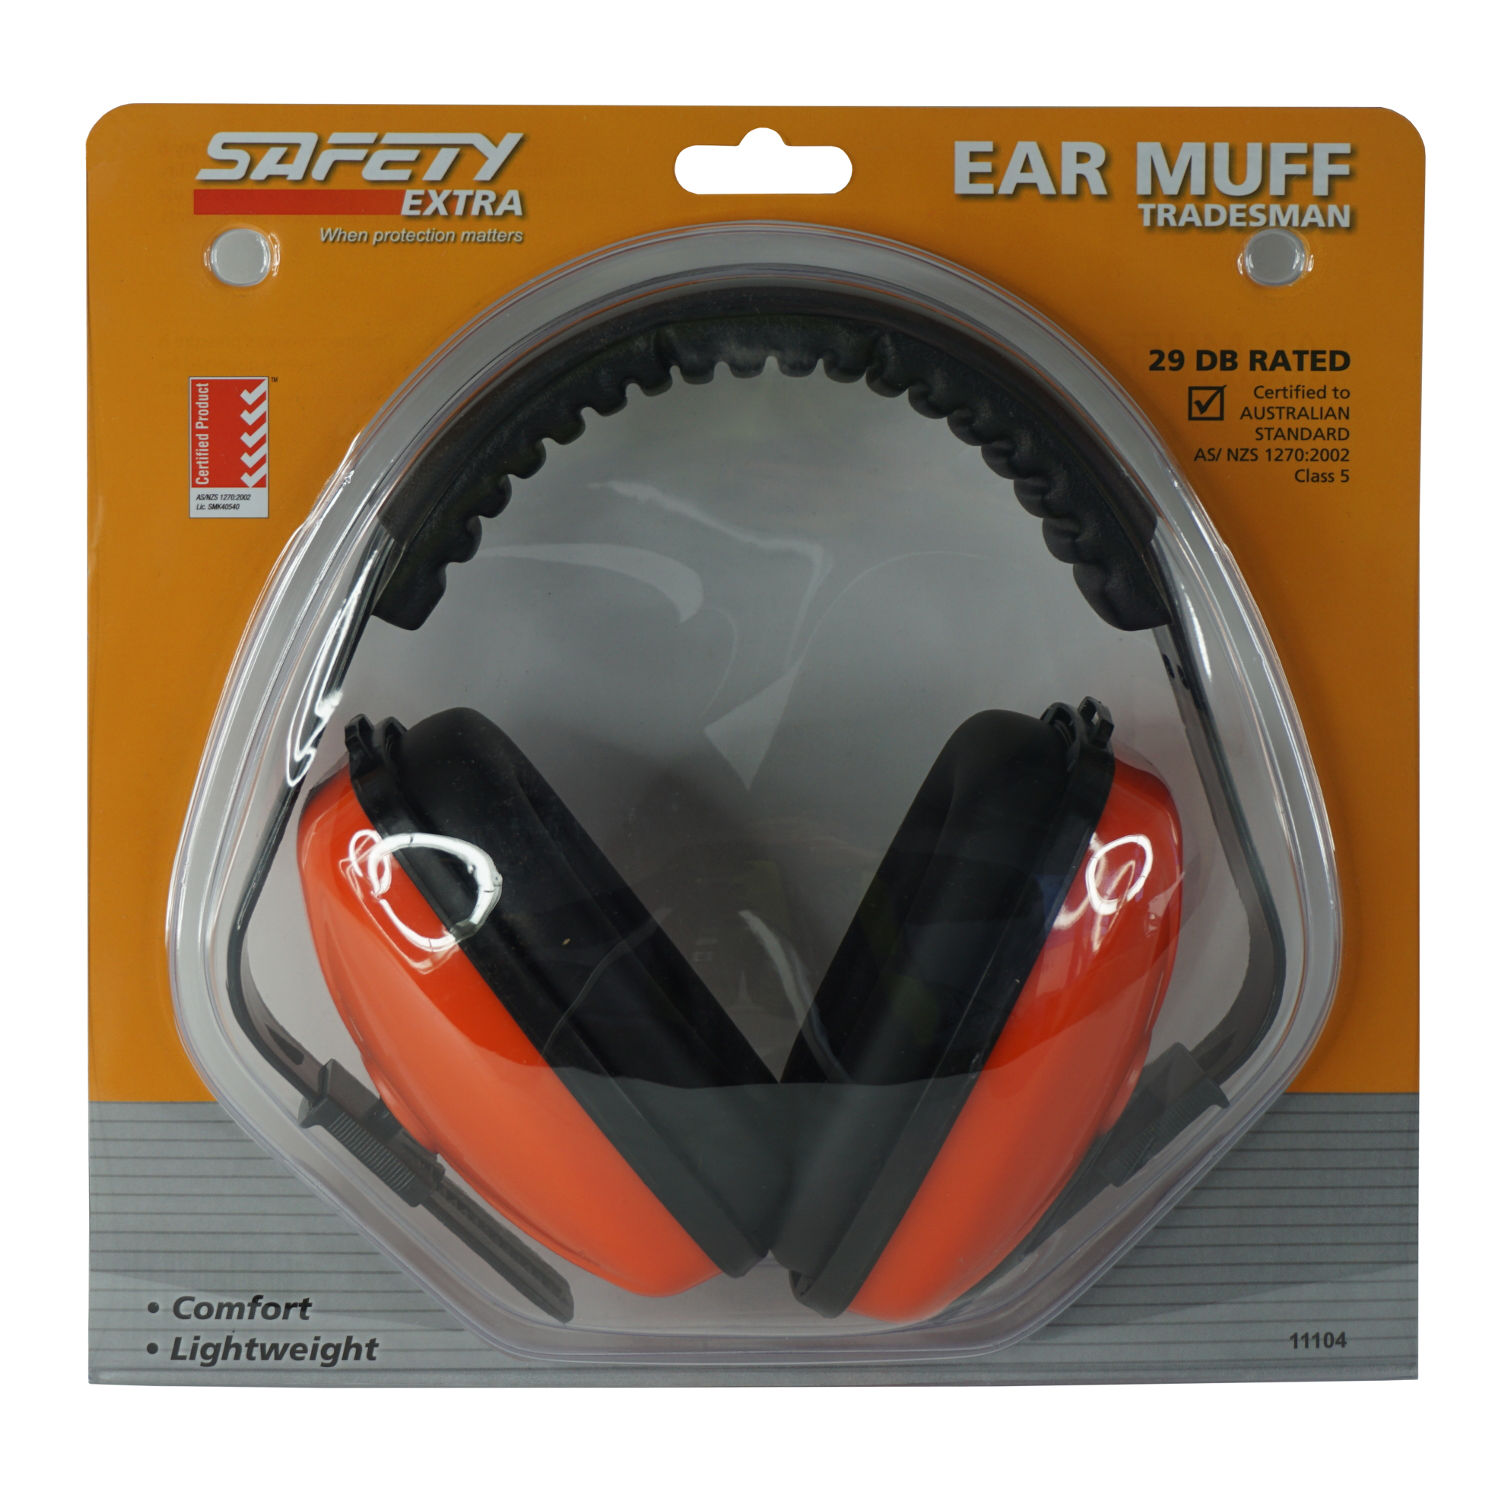 Ear Muffs 11104 by Safety Extra